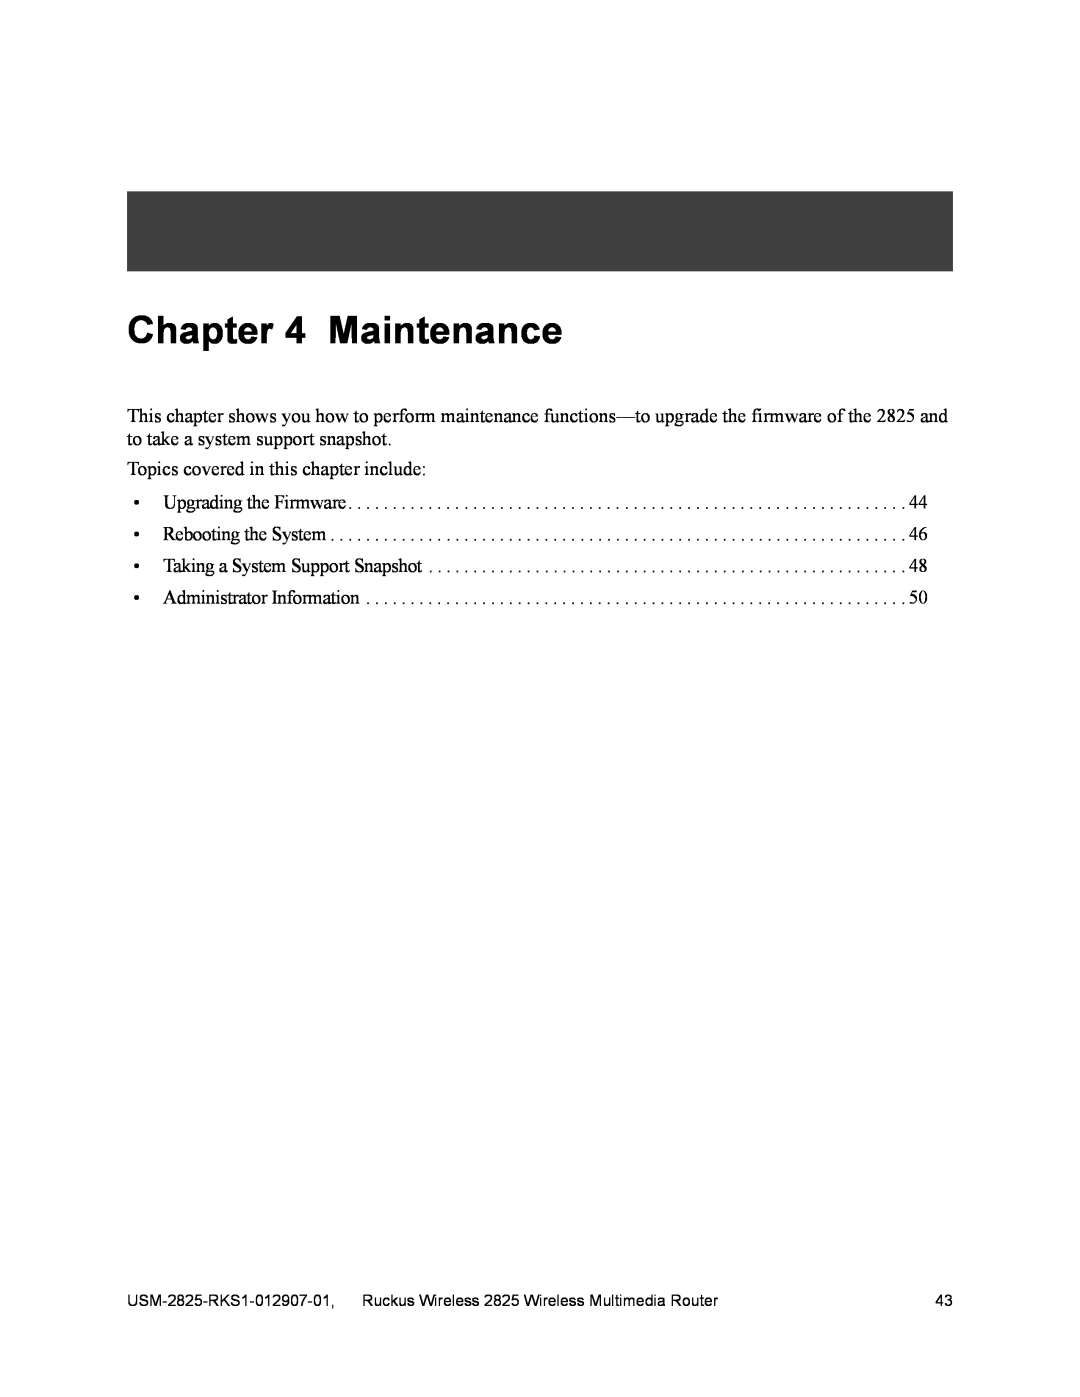 Ruckus Wireless 2111 Maintenance, Topics covered in this chapter include Upgrading the Firmware, Administrator Information 